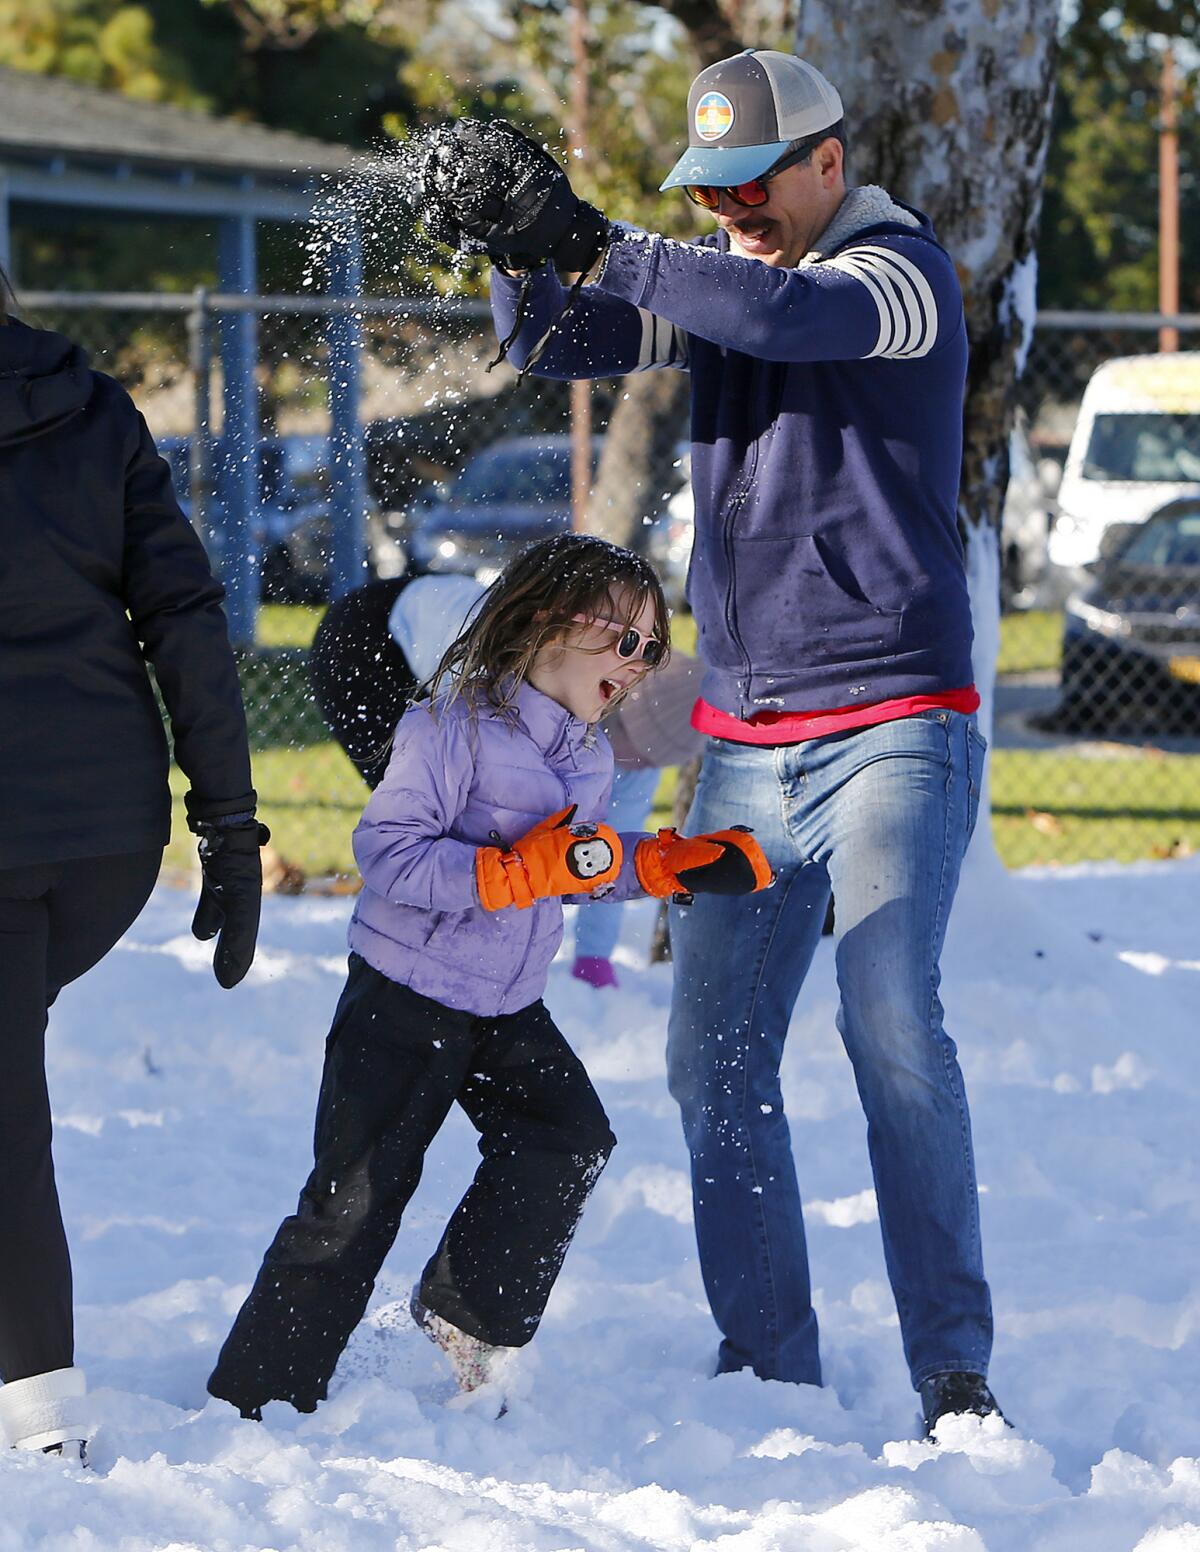 Sean Norris sprinkles snow over his daughter, Kayla, 6, during the annual Snow Land event.